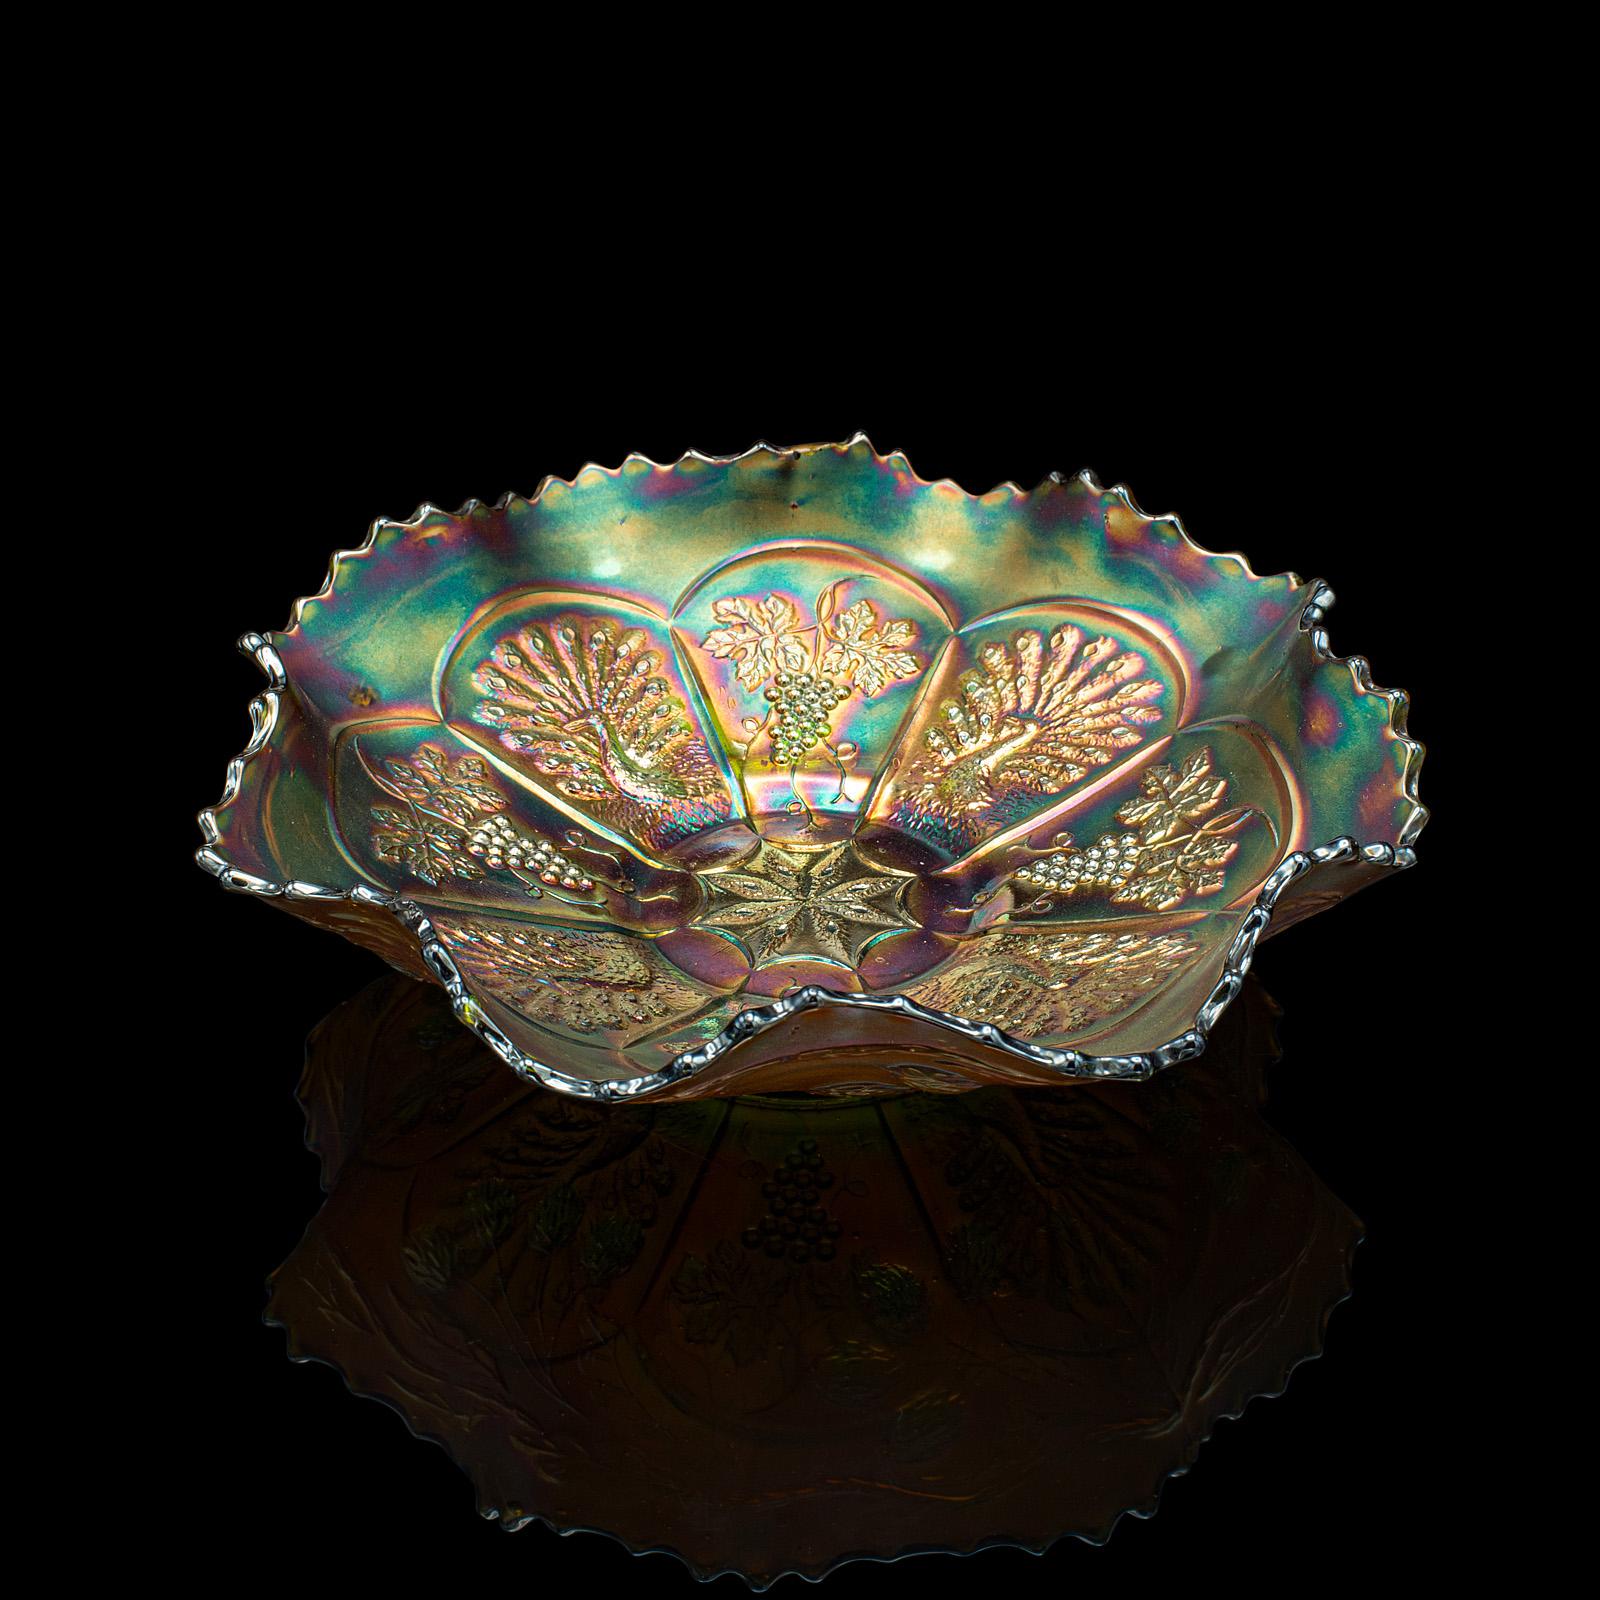 
This is a small vintage lustre dish. A Continental, art glass decorative fruit bowl, dating to the late 20th century, circa 1970.

Radiant colour and serpentine form catches the eye
Displays a desirable aged patina and in good order
Green glass